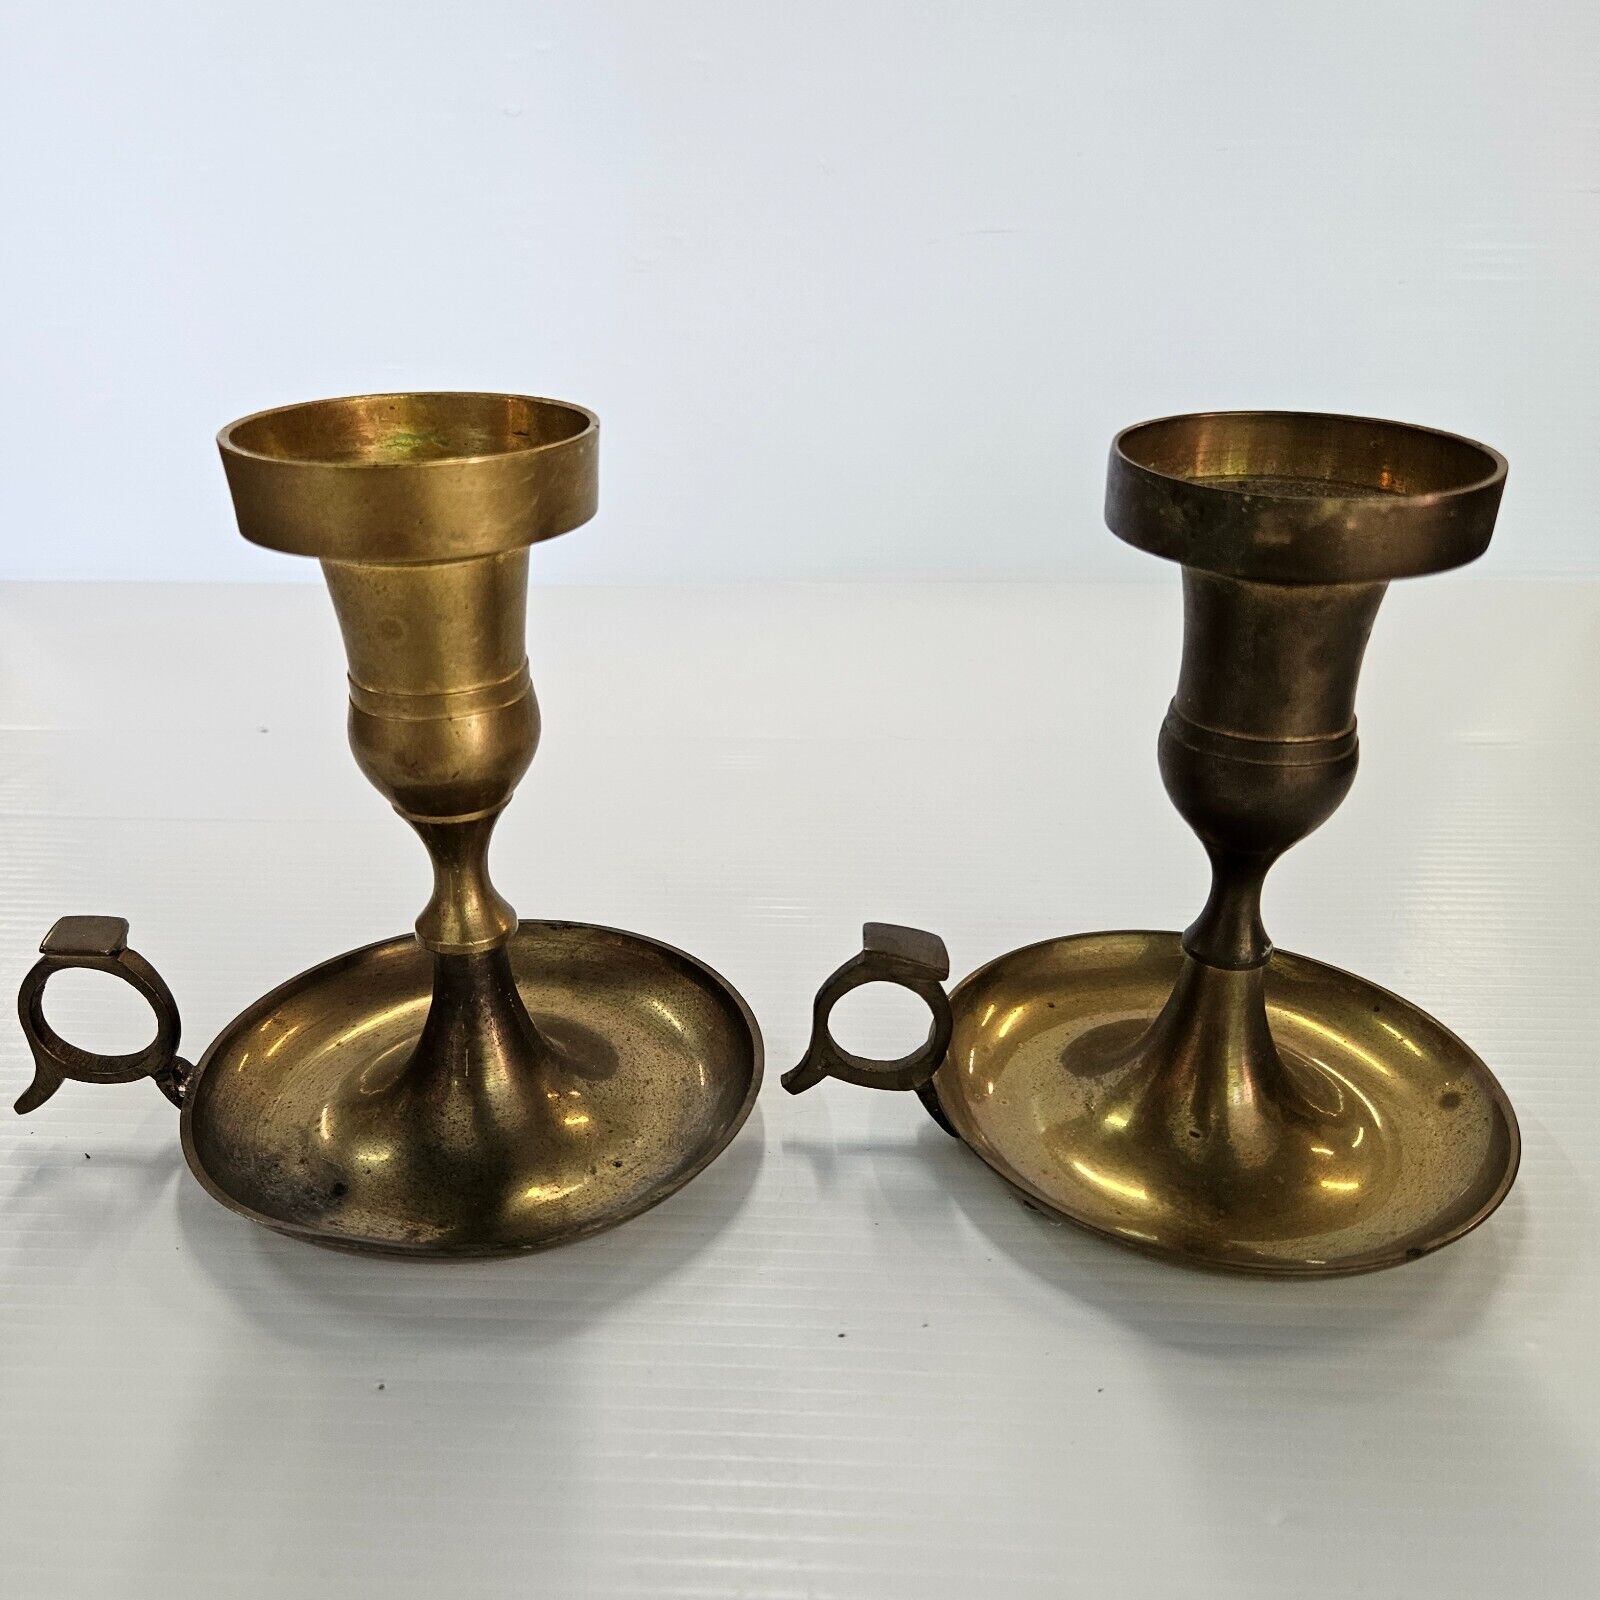 Vintage India Solid Brass Candle Holder with Finger Ring Lot of 2 candle holders